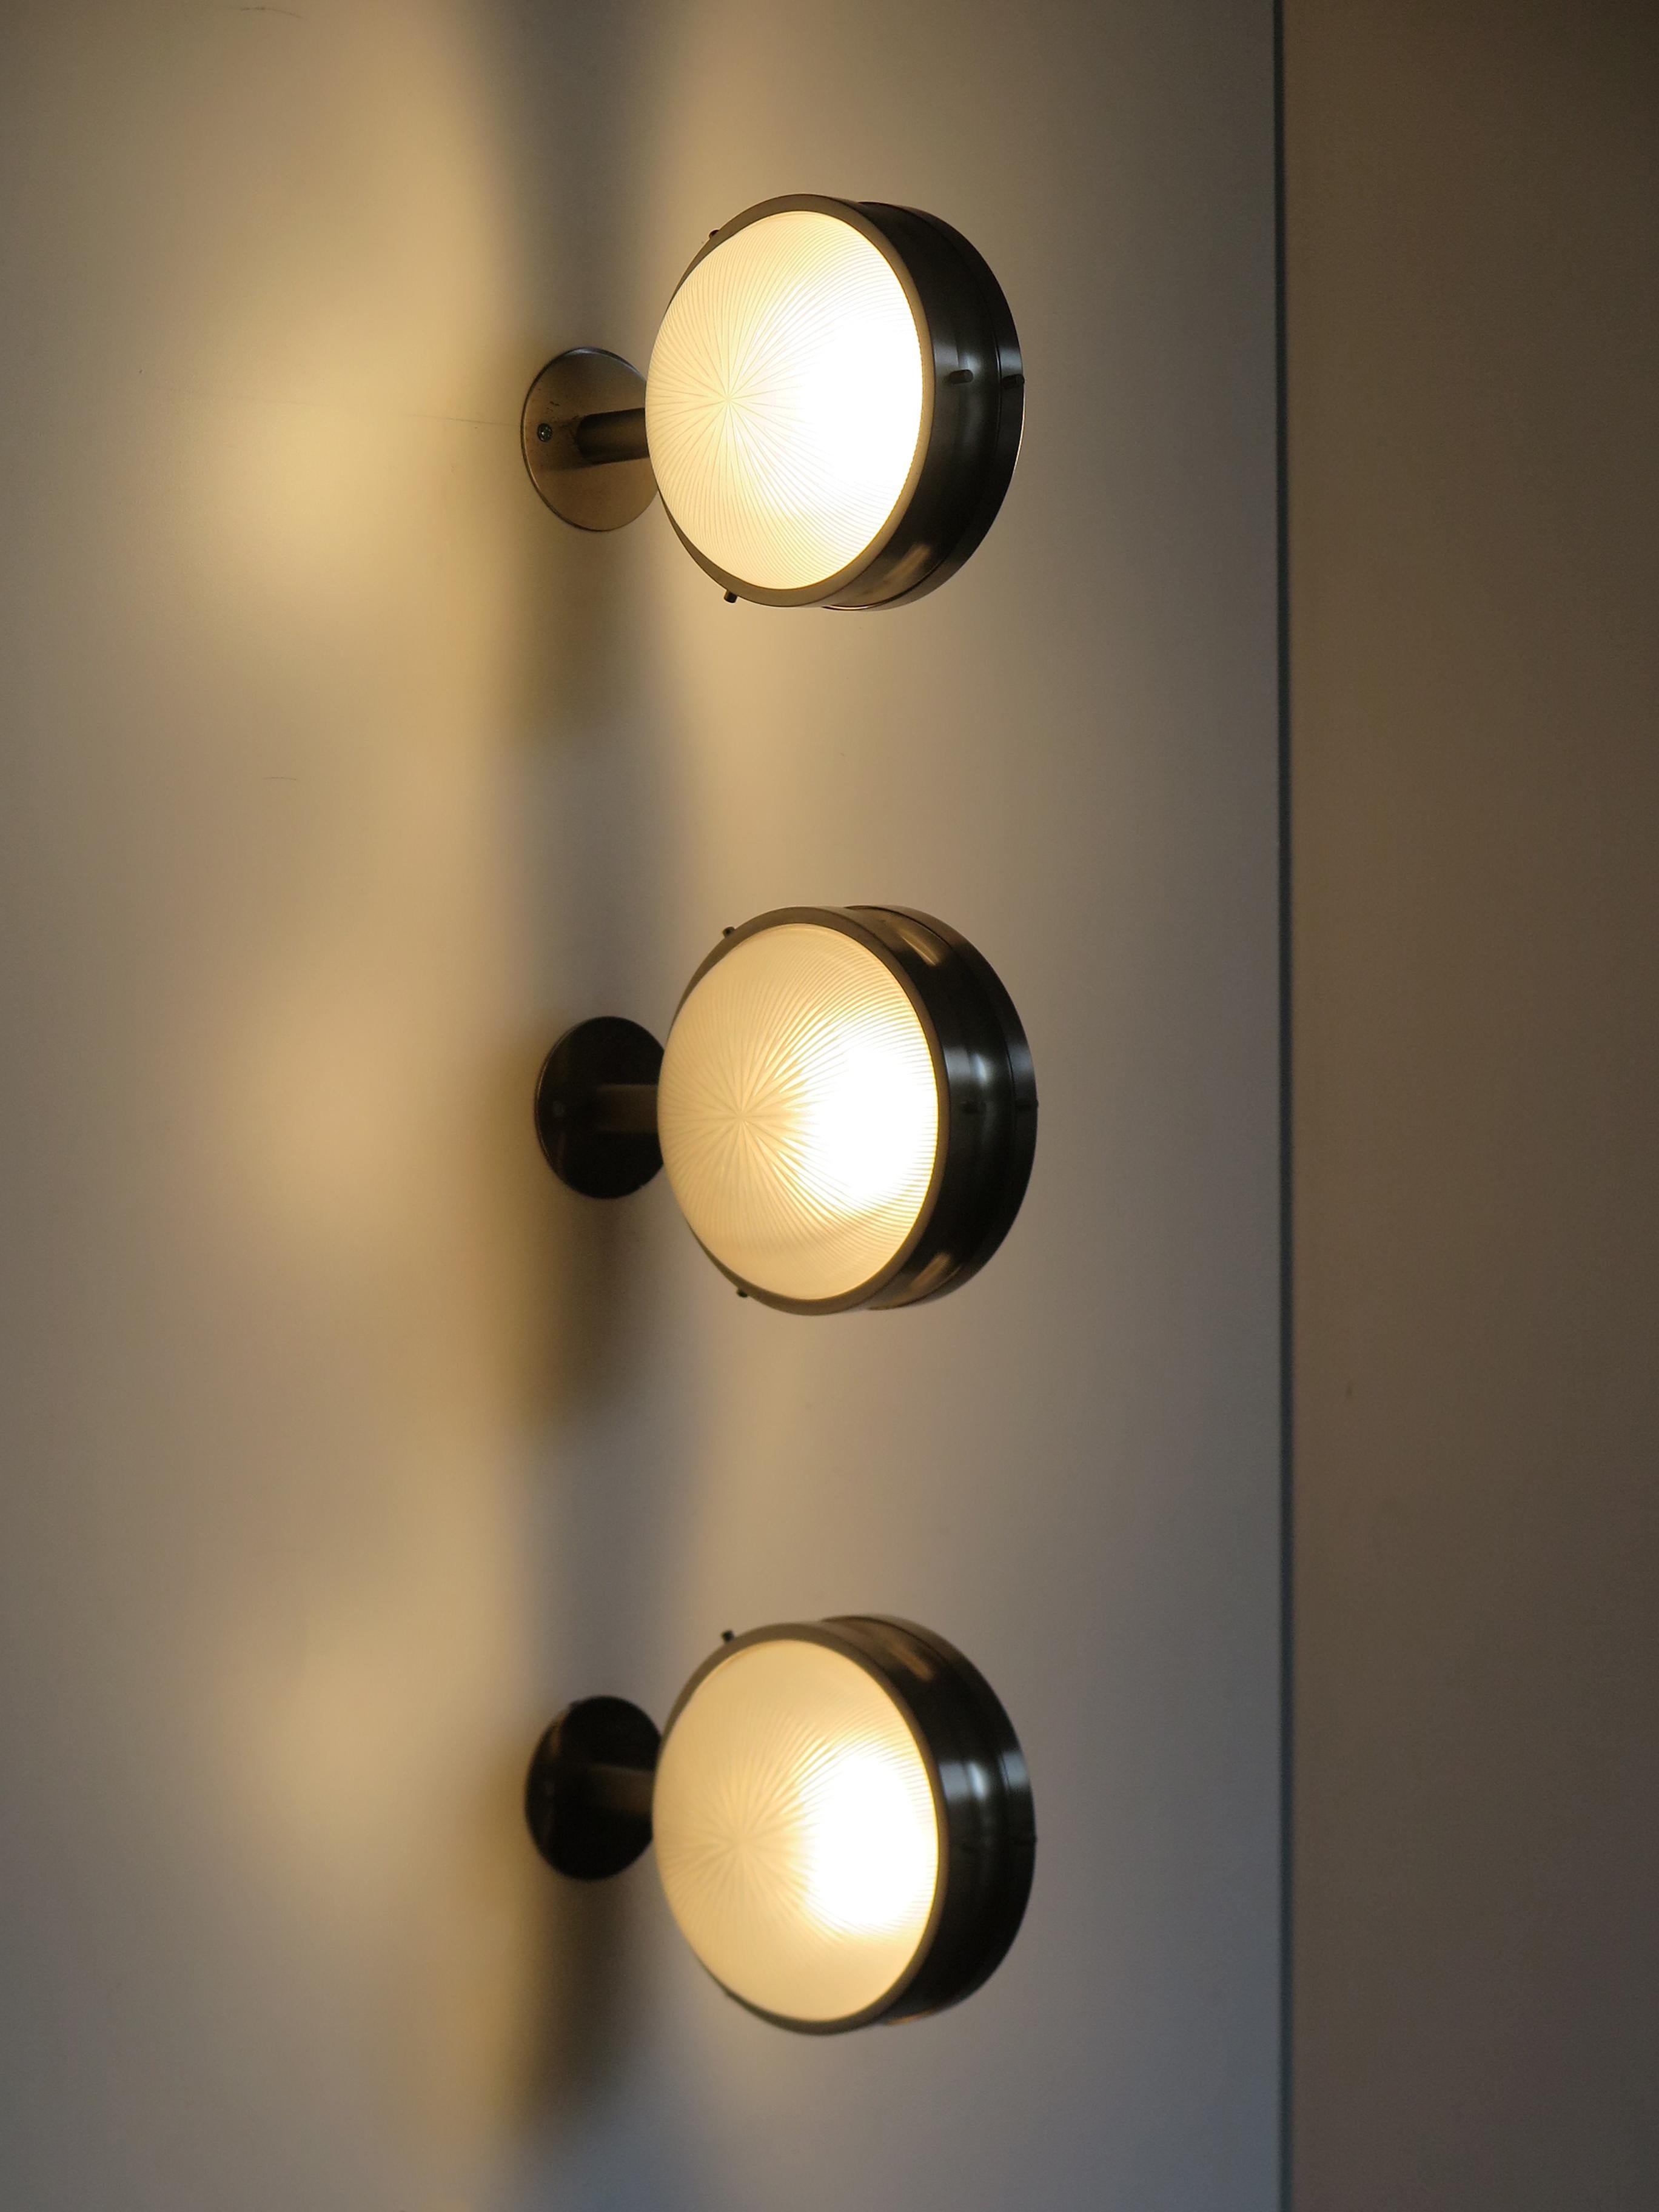 Italian set of three Mid-Century Modern design sconces wall lamps from the Gamma series designed by Sergio Mazza and produced by Artemide with brushed steel frame and thick molded glass diffusers, Italy 1960s.

The wall sconces can be mounted